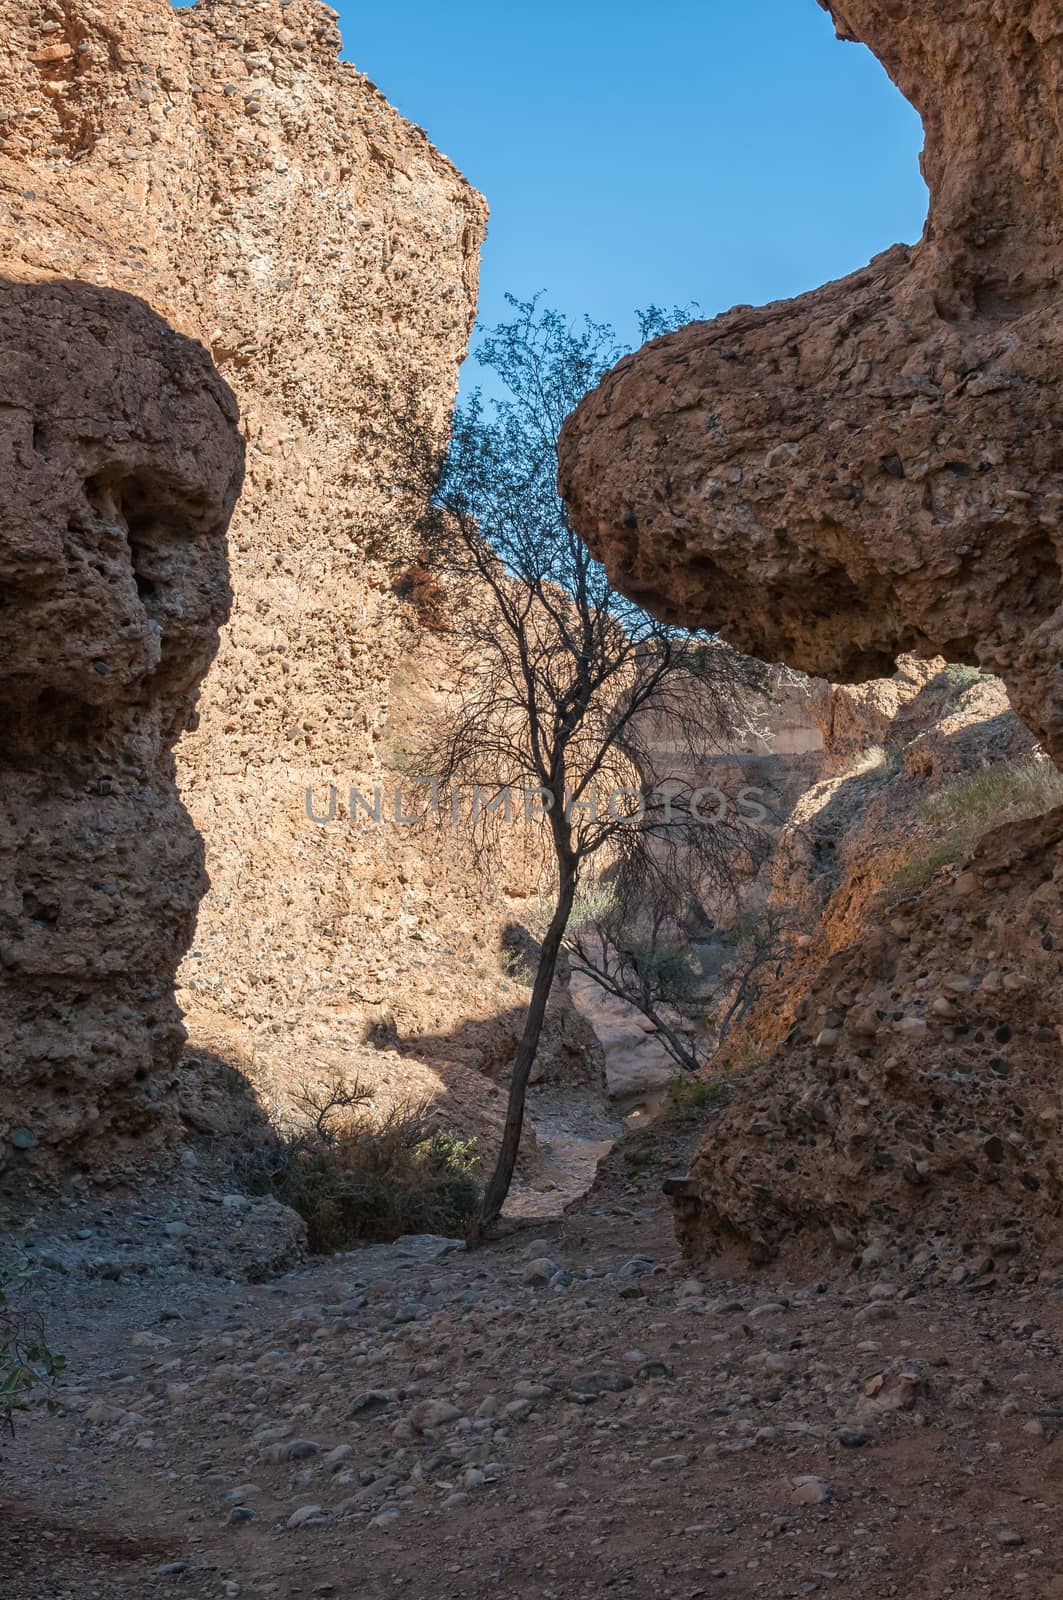 Entrance to the Sesriem Canyon by dpreezg